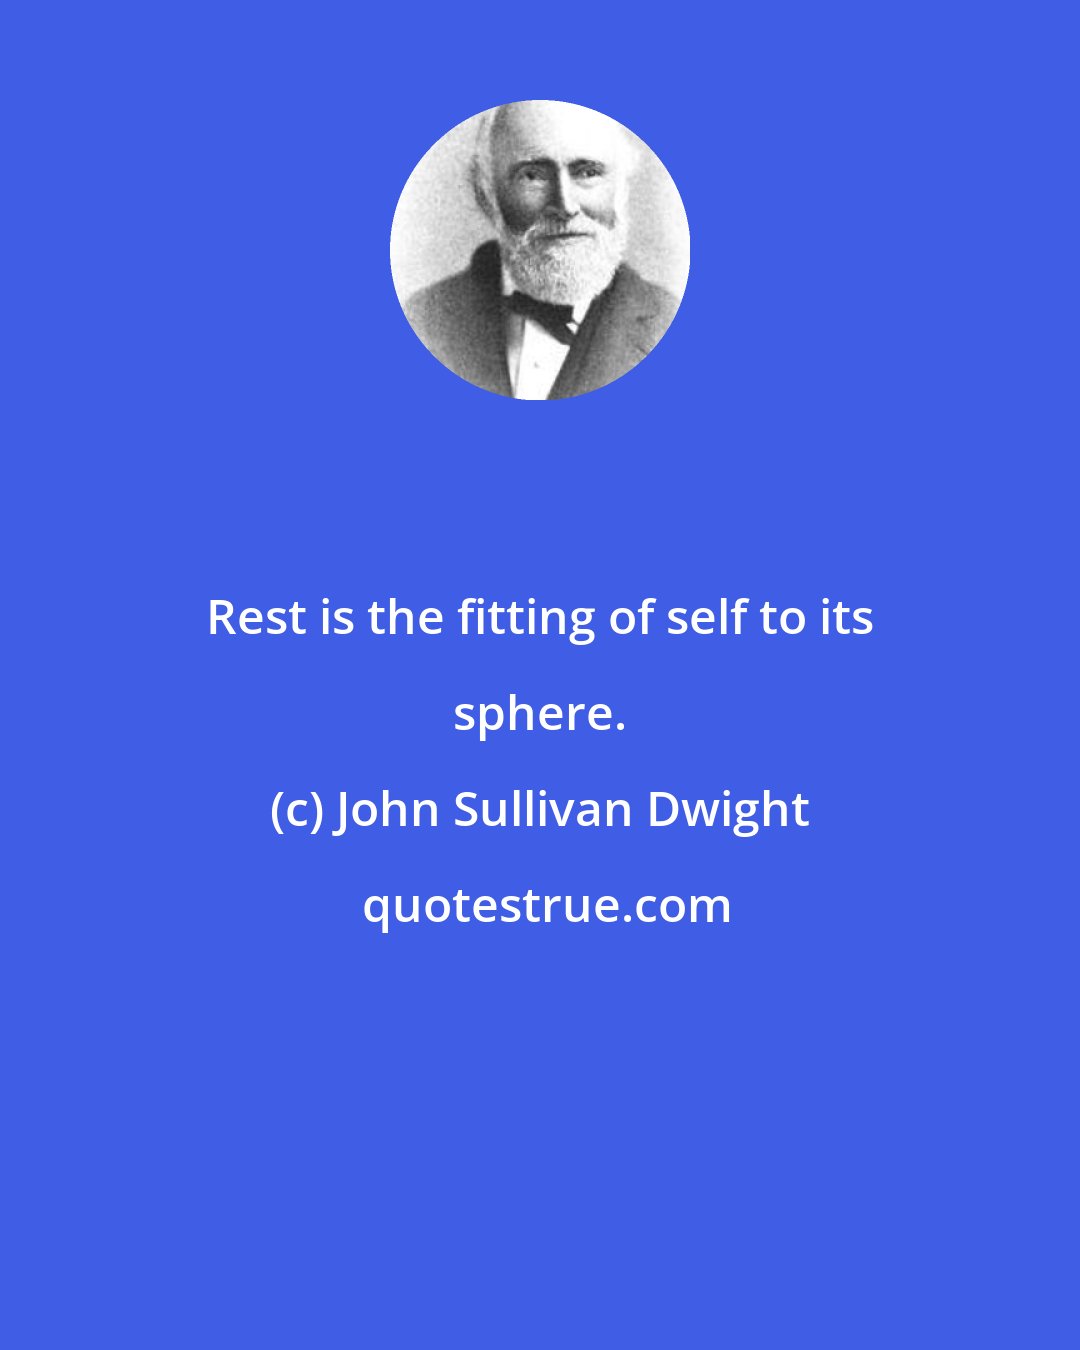 John Sullivan Dwight: Rest is the fitting of self to its sphere.